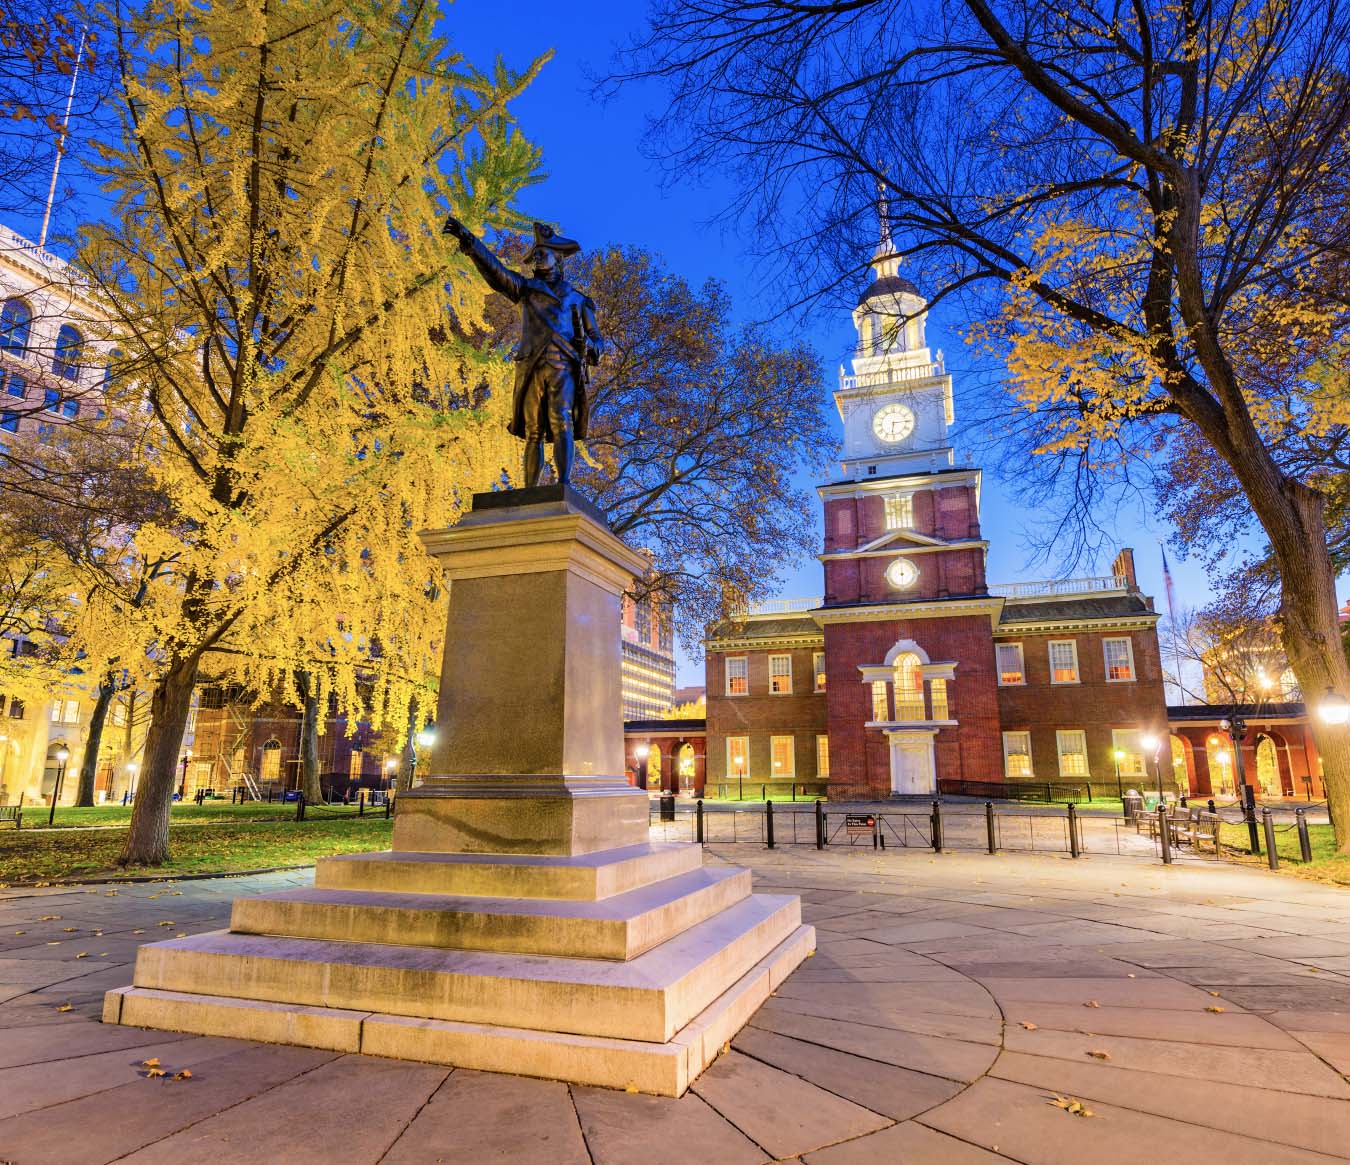 Things to Do in Philadelphia - Independence Hall